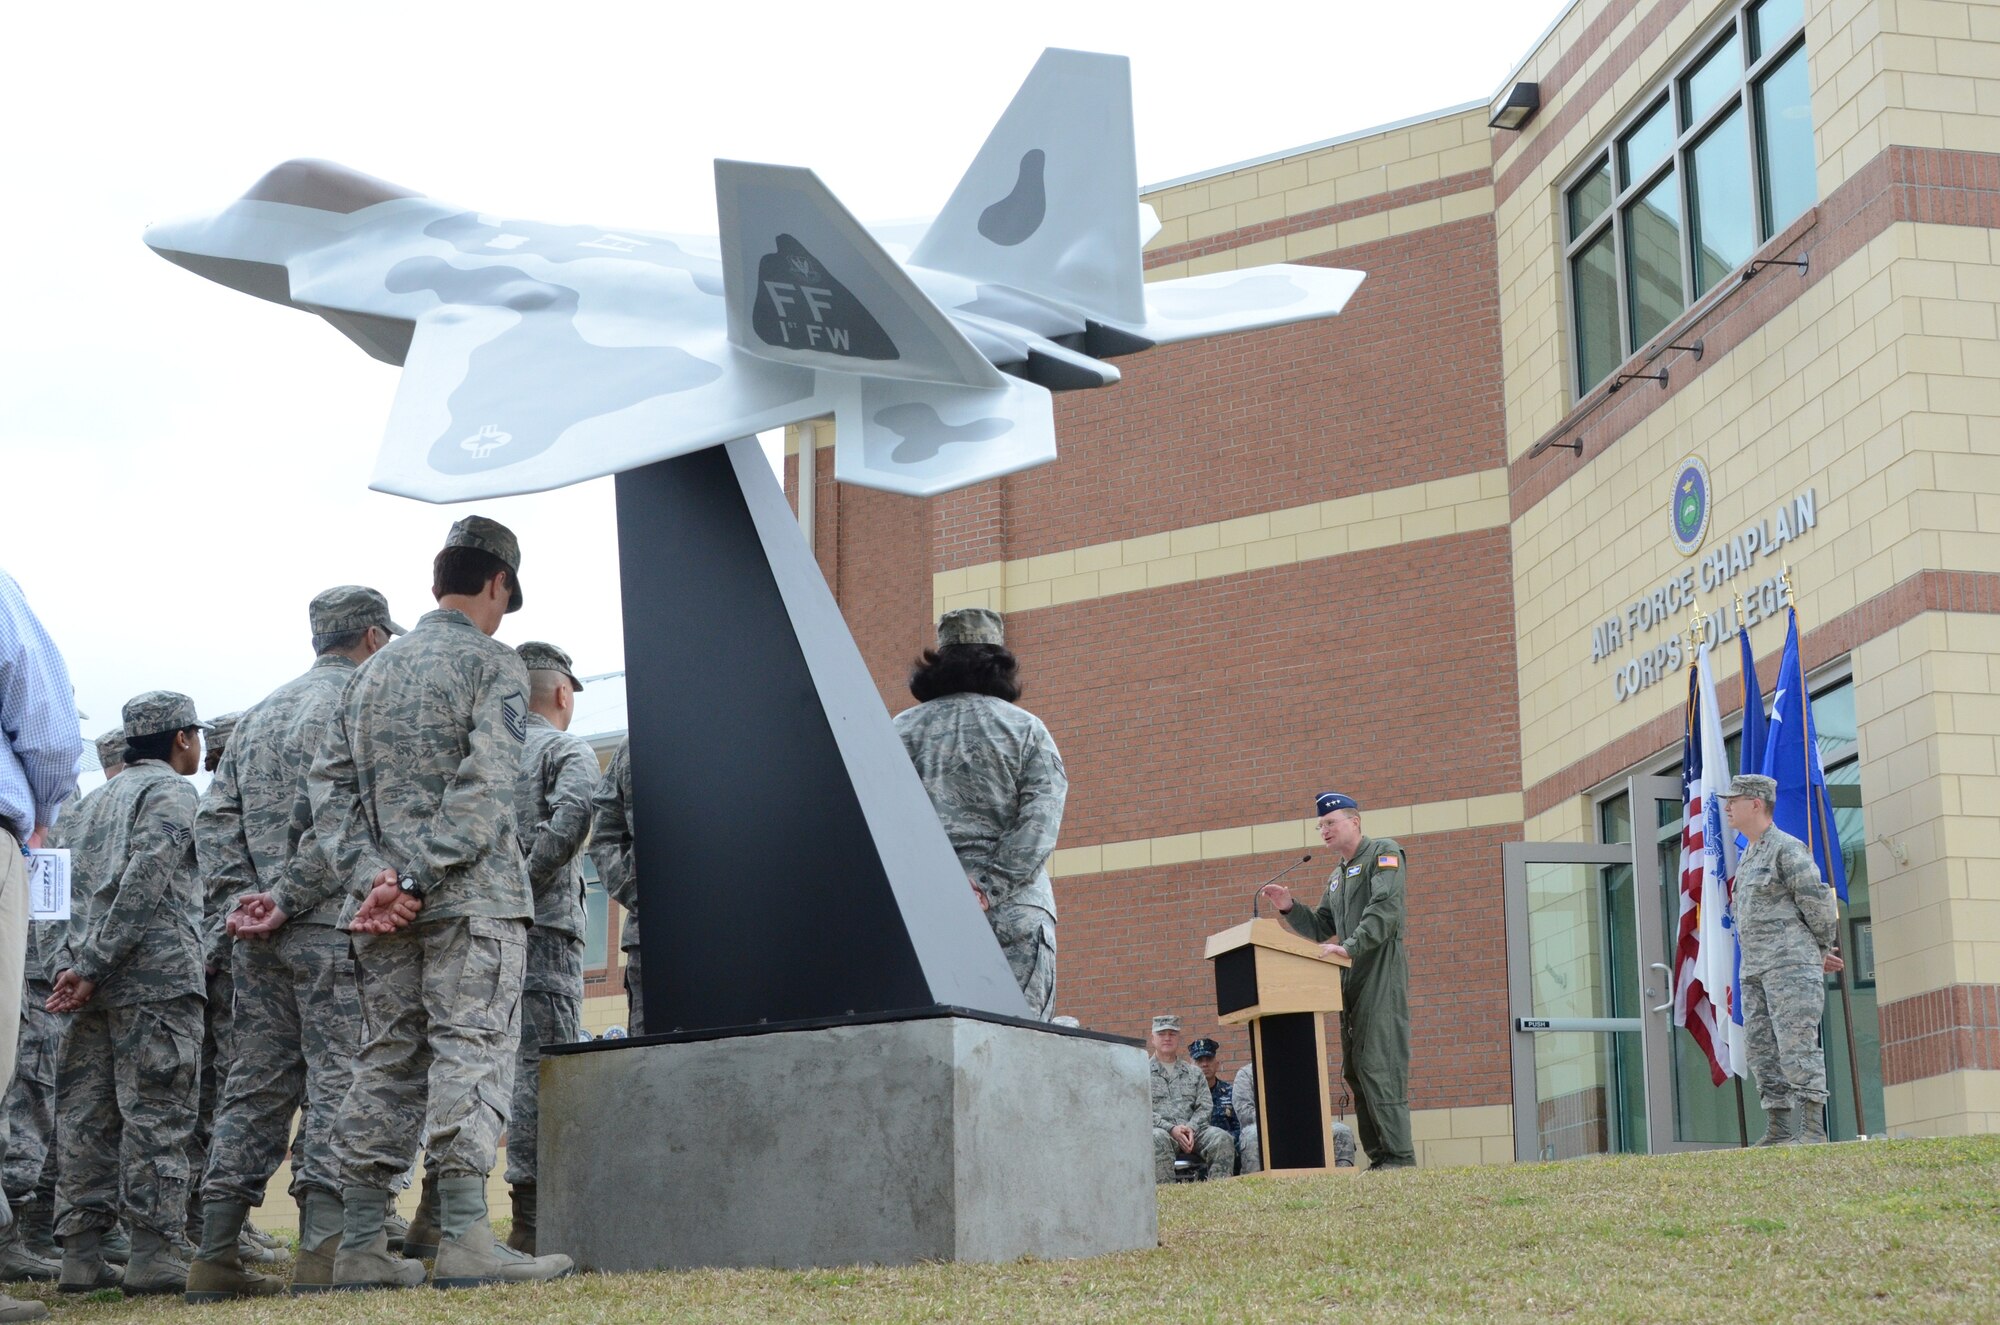 Lt. Gen. David Fadok president and commander of the Air University, addresses students and cadre of the Air Force Chaplain Corps College at Fort Jackson, S.C. (Air Force photo/Susanne Kappler)